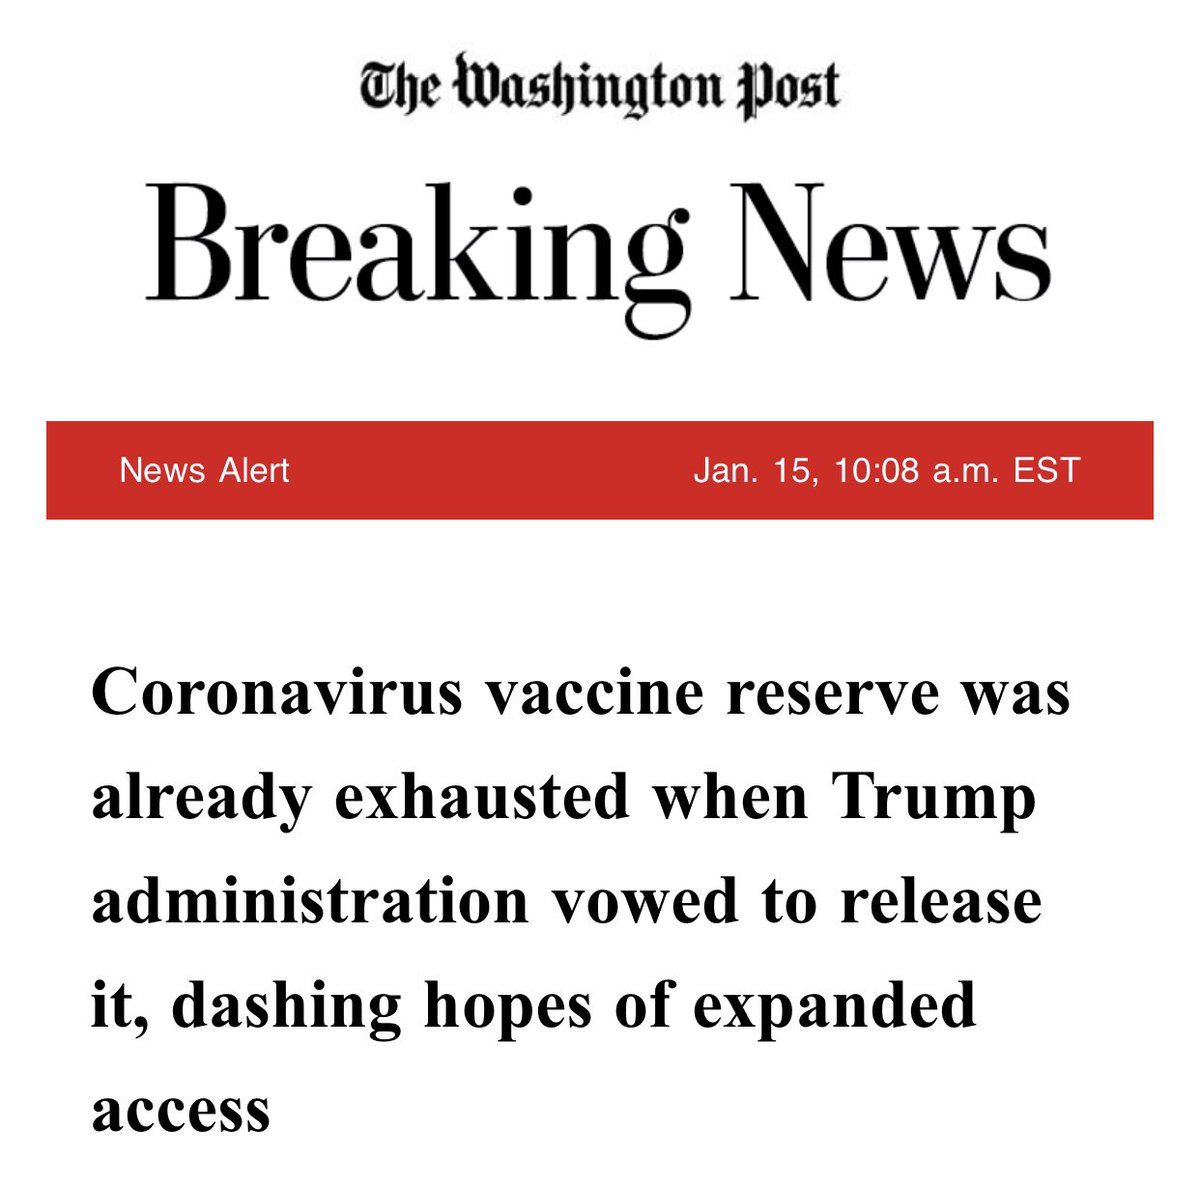 BREAKING—We are out of vaccine reserves! Trump HHS Sec Azar announced this week that the govt would begin releasing  #COVID19 vaccine doses held in reserve for 2nd shots—but no such reserve existed!! Trump HHS had already shipped out reserves end of Dec!  https://www.washingtonpost.com/health/2021/01/15/trump-vaccine-reserve-used-up/